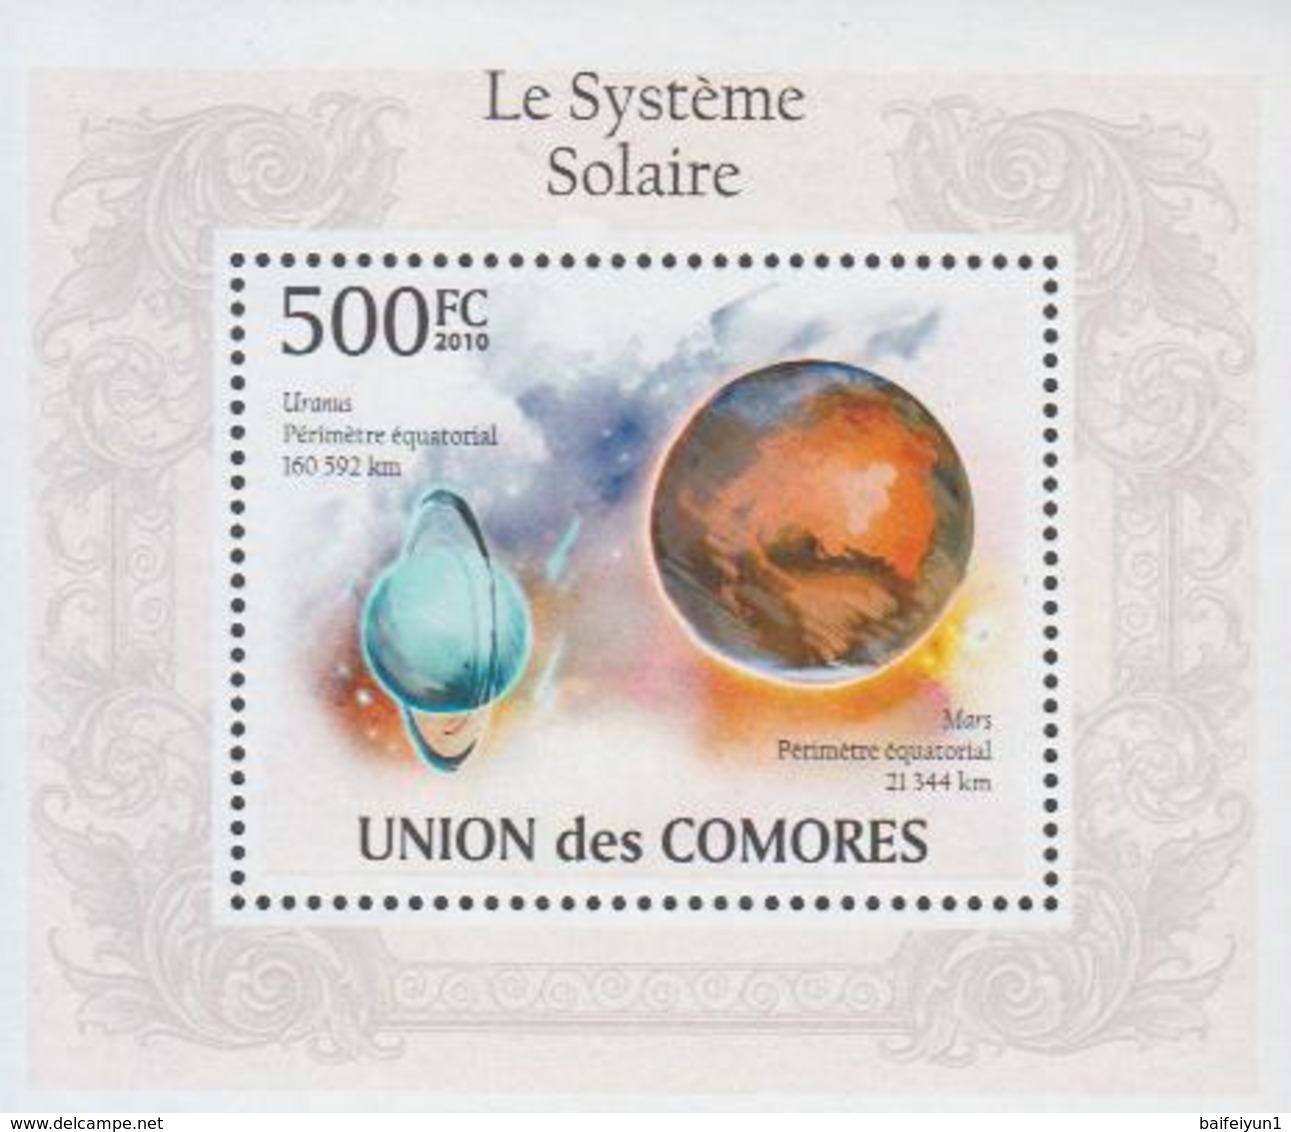 2010 Comores  Stamps  Solar System 4 S/S - Astrology